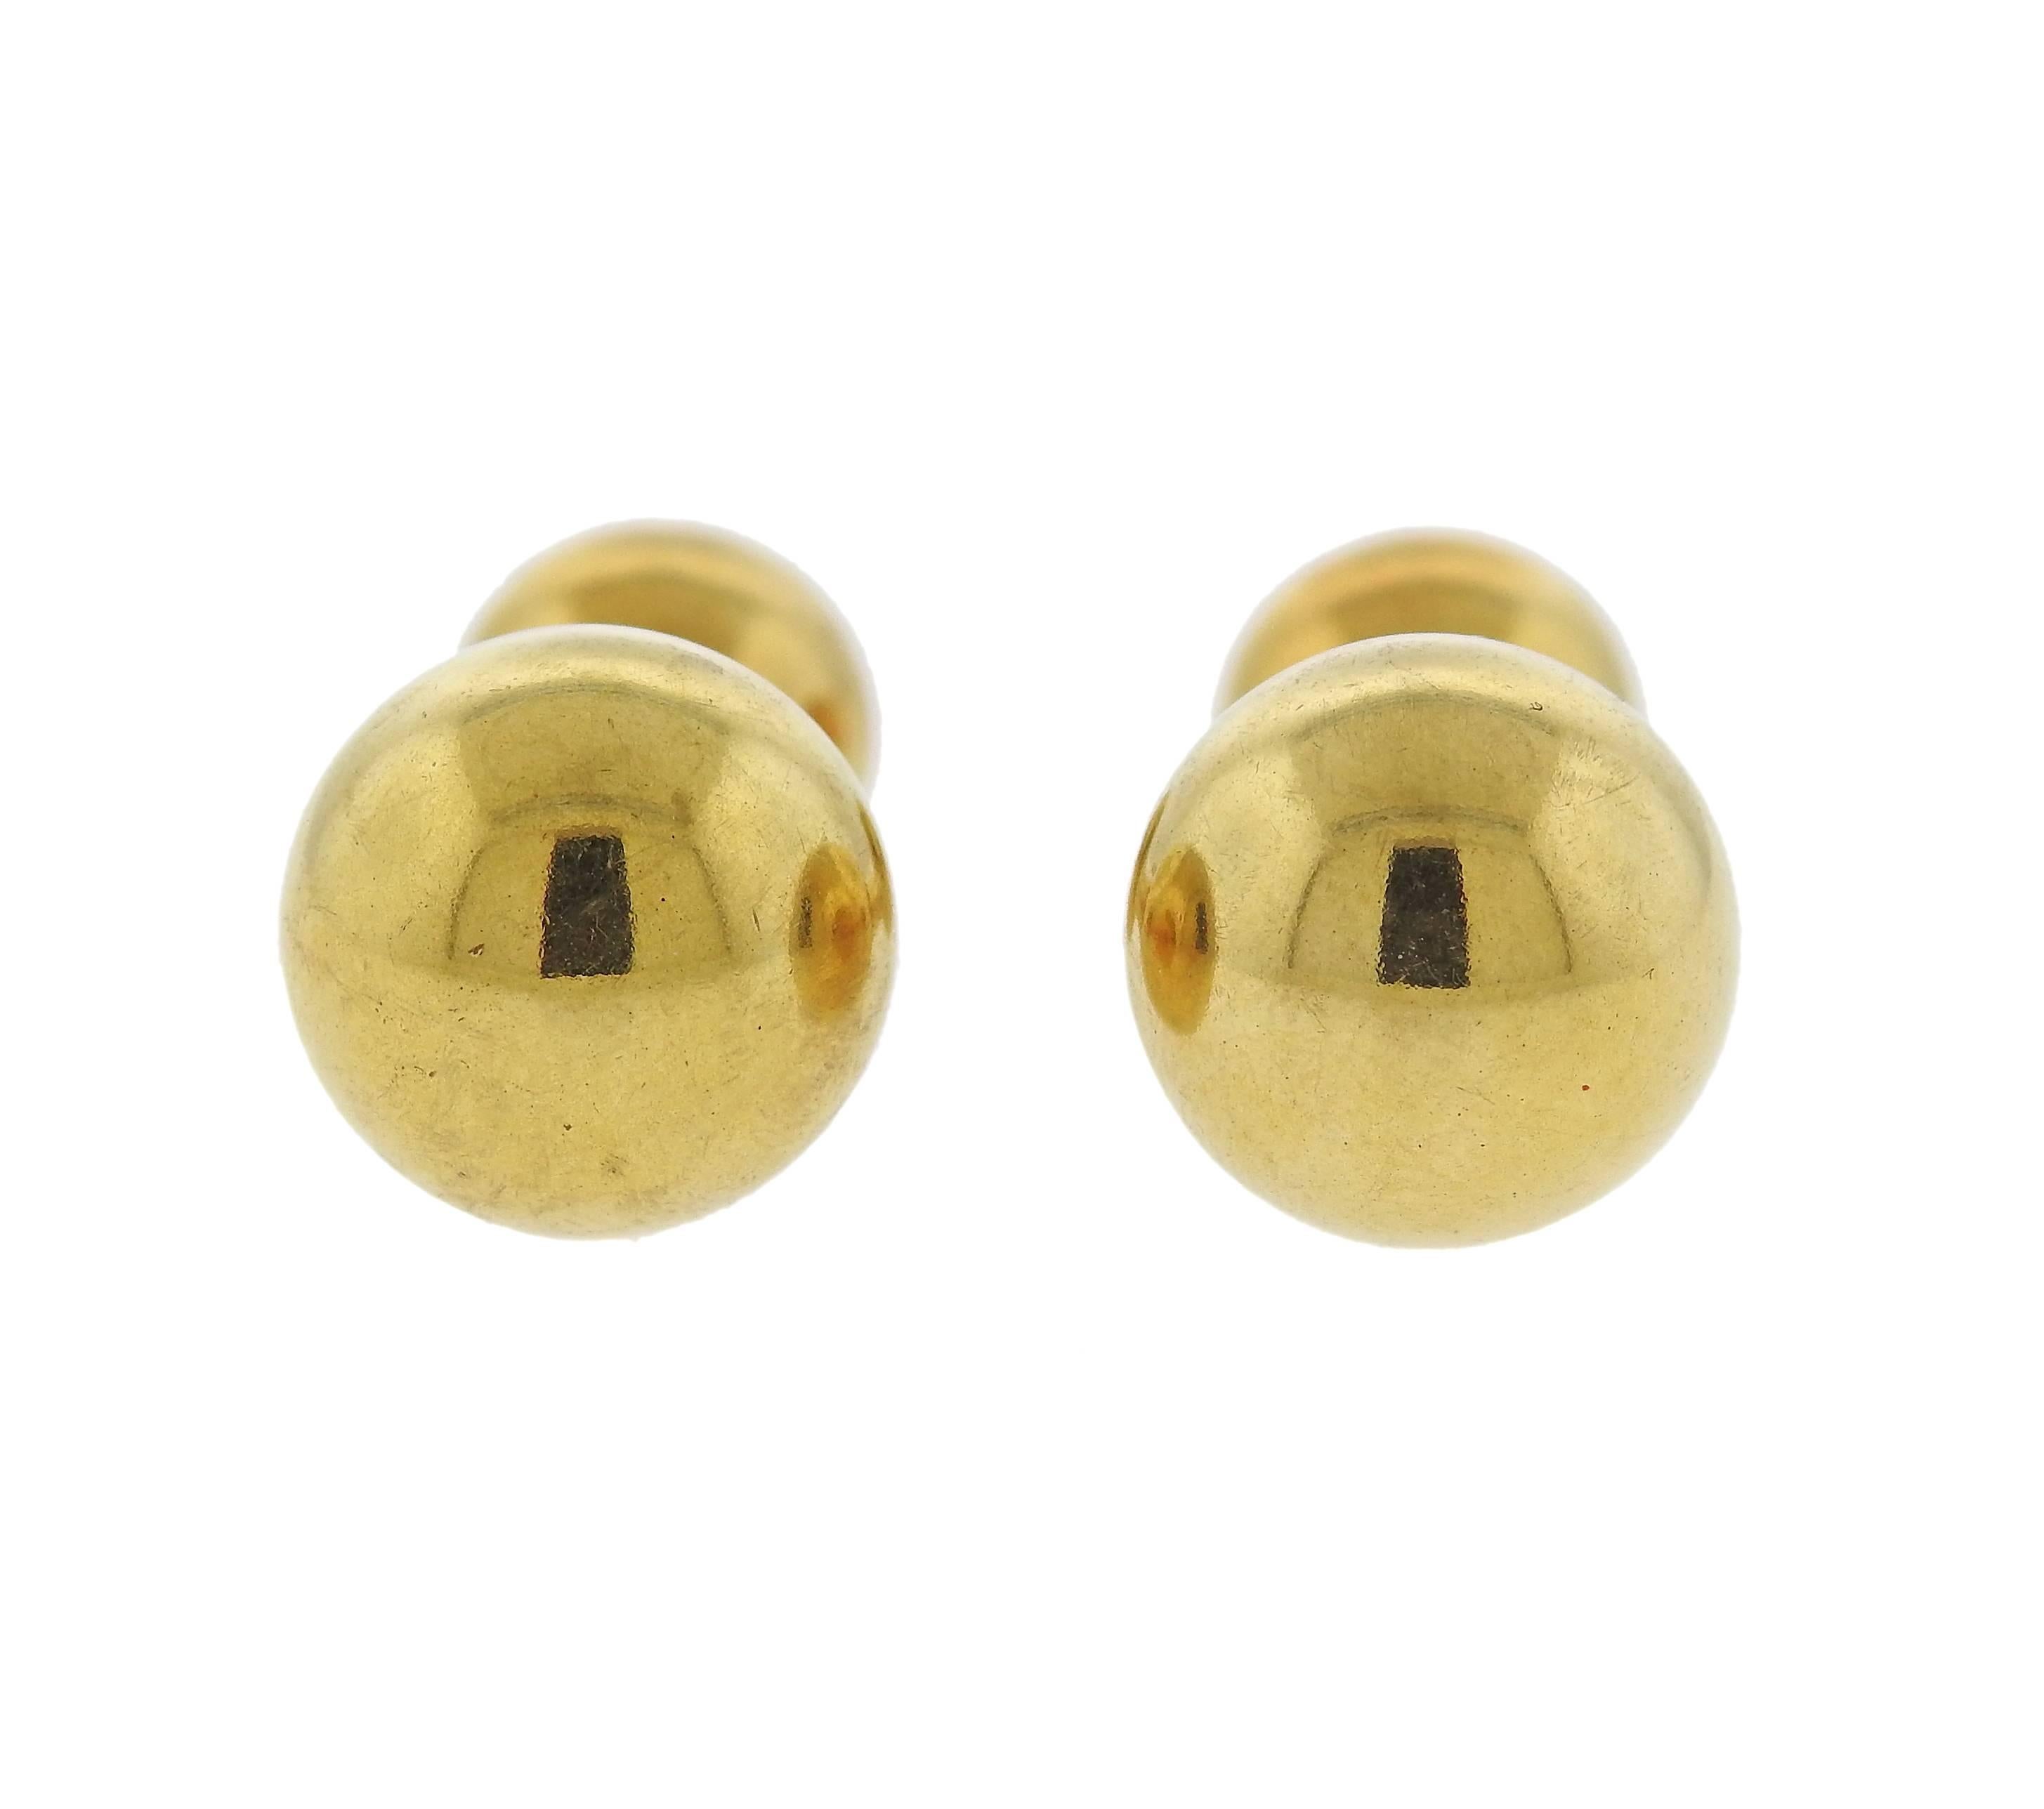 Pair of 18k yellow gold dumbbell cufflinks, crafted by Cartier. Cufflink top is 13mm in diameter, back - 9.5mm. Weight - 11.1 grams. Marked: Cartier, 18k. 